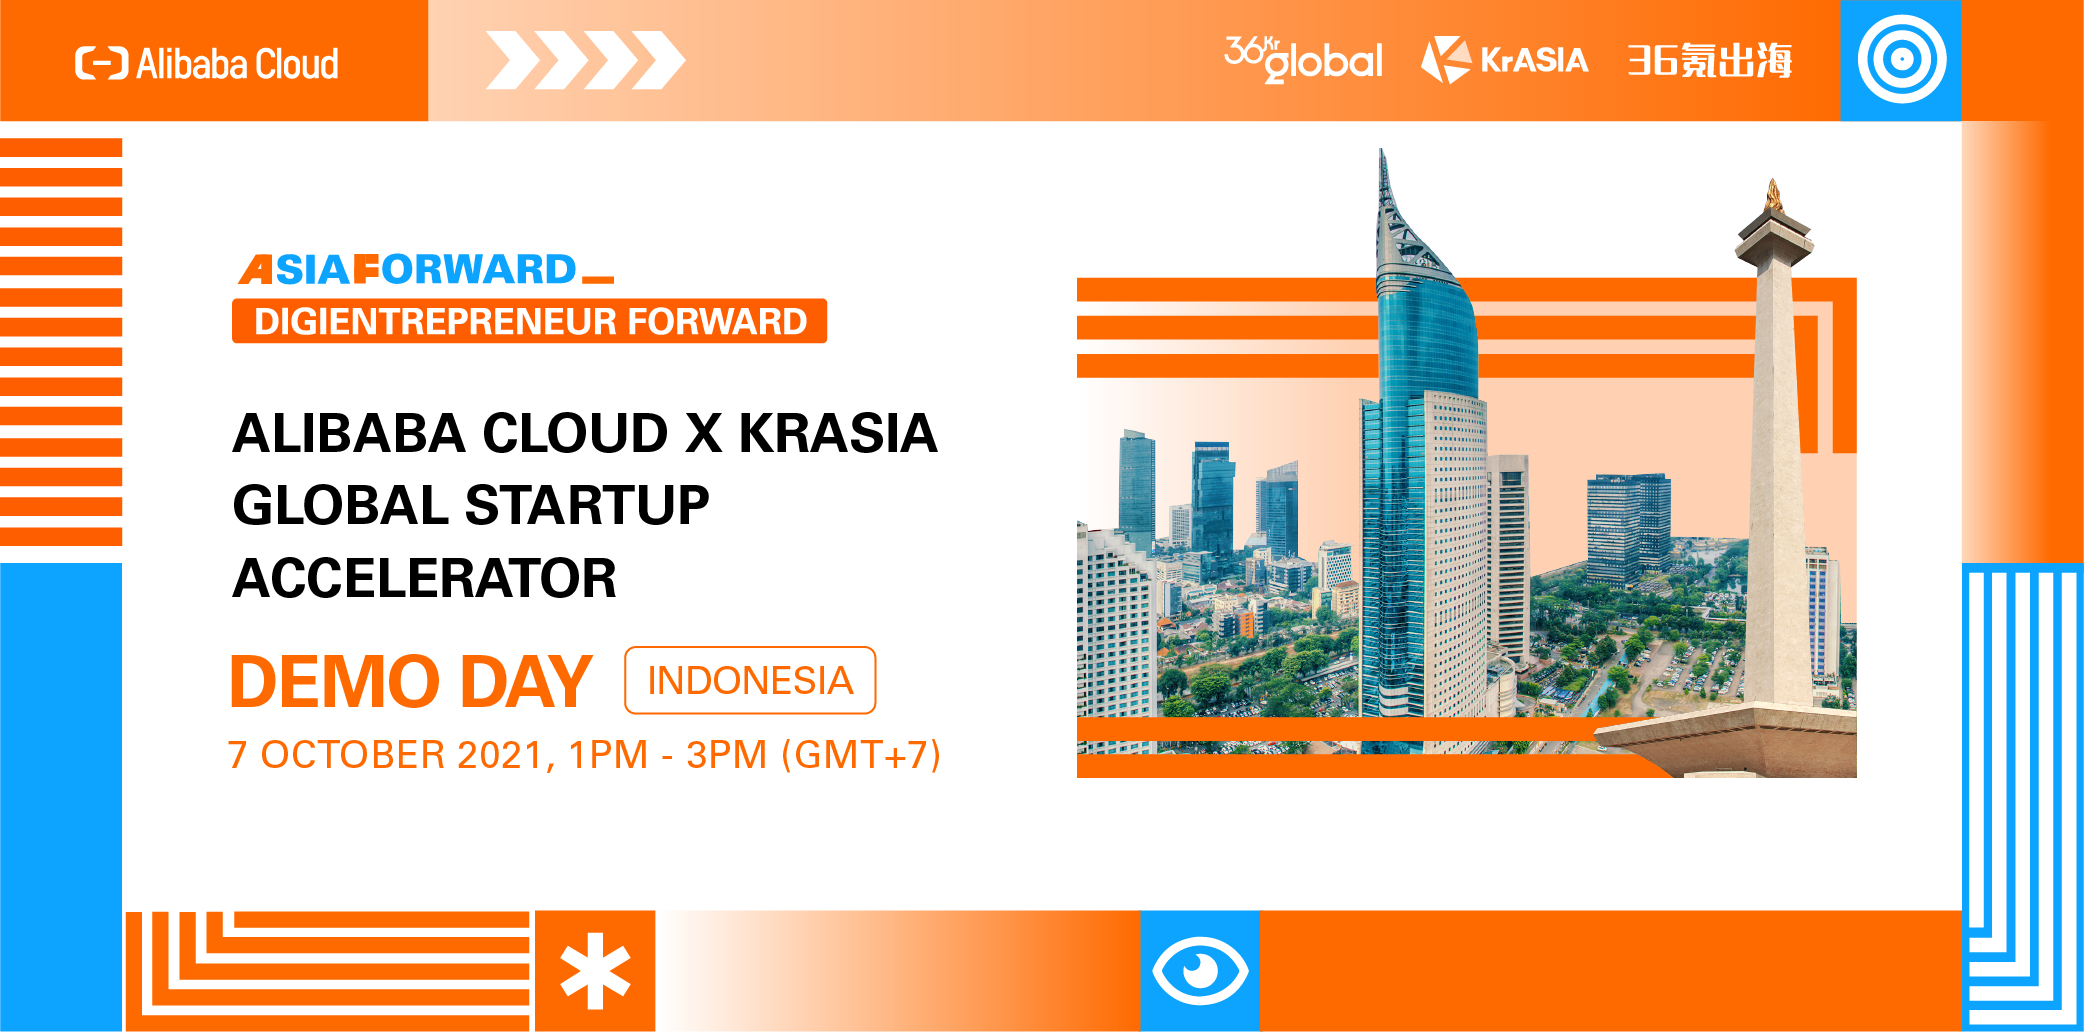 Register for a spot in the Alibaba Cloud x KrASIA Global Startup Accelerator Indonesia Demo Day